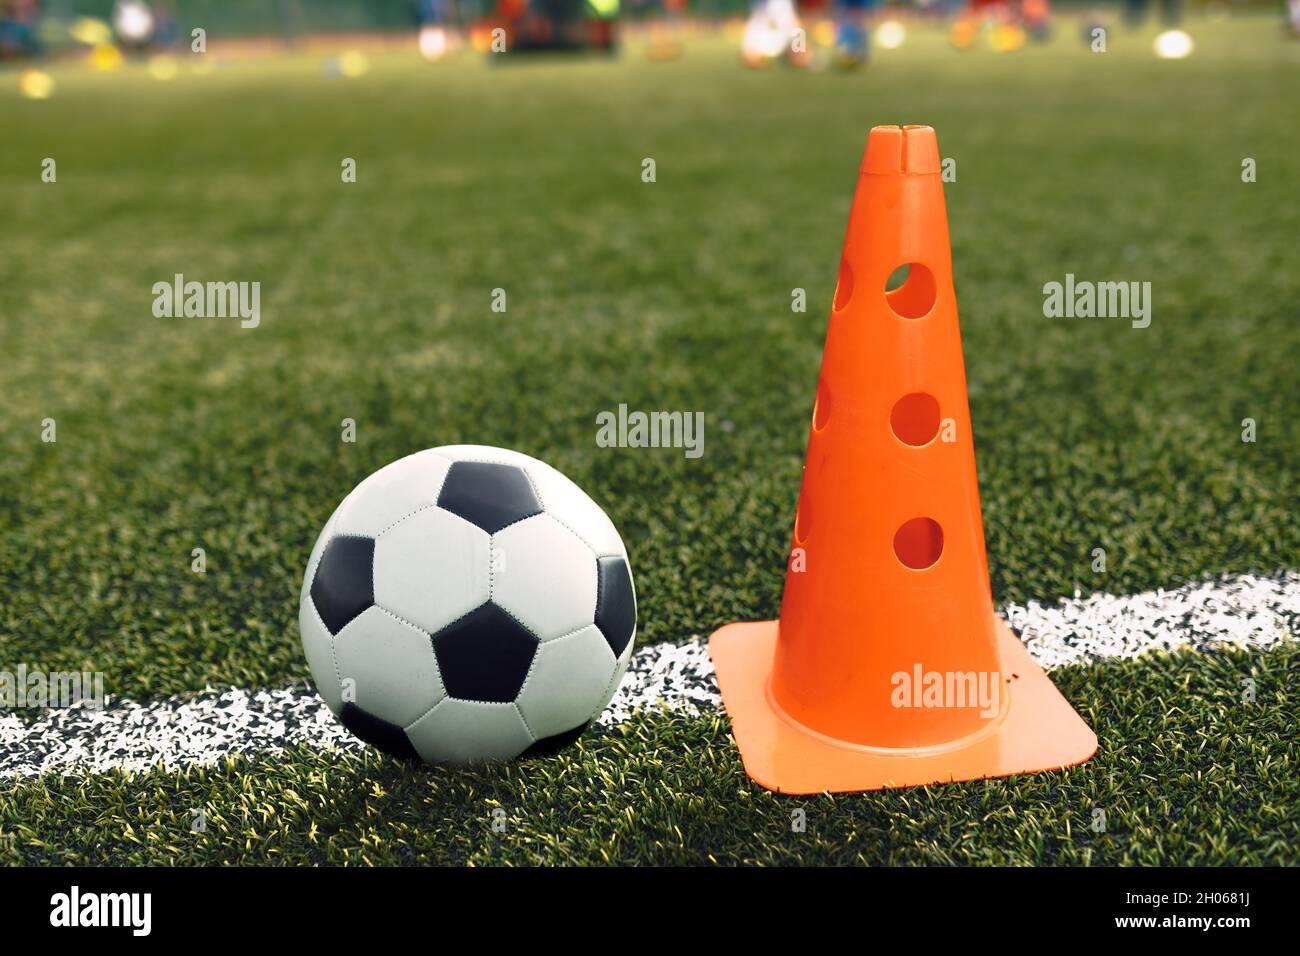 Soccer Ball and Training Cone Lying on Football Pitch Sideline. Soccer Training Equipment on School Practice Pitch Stock Photo